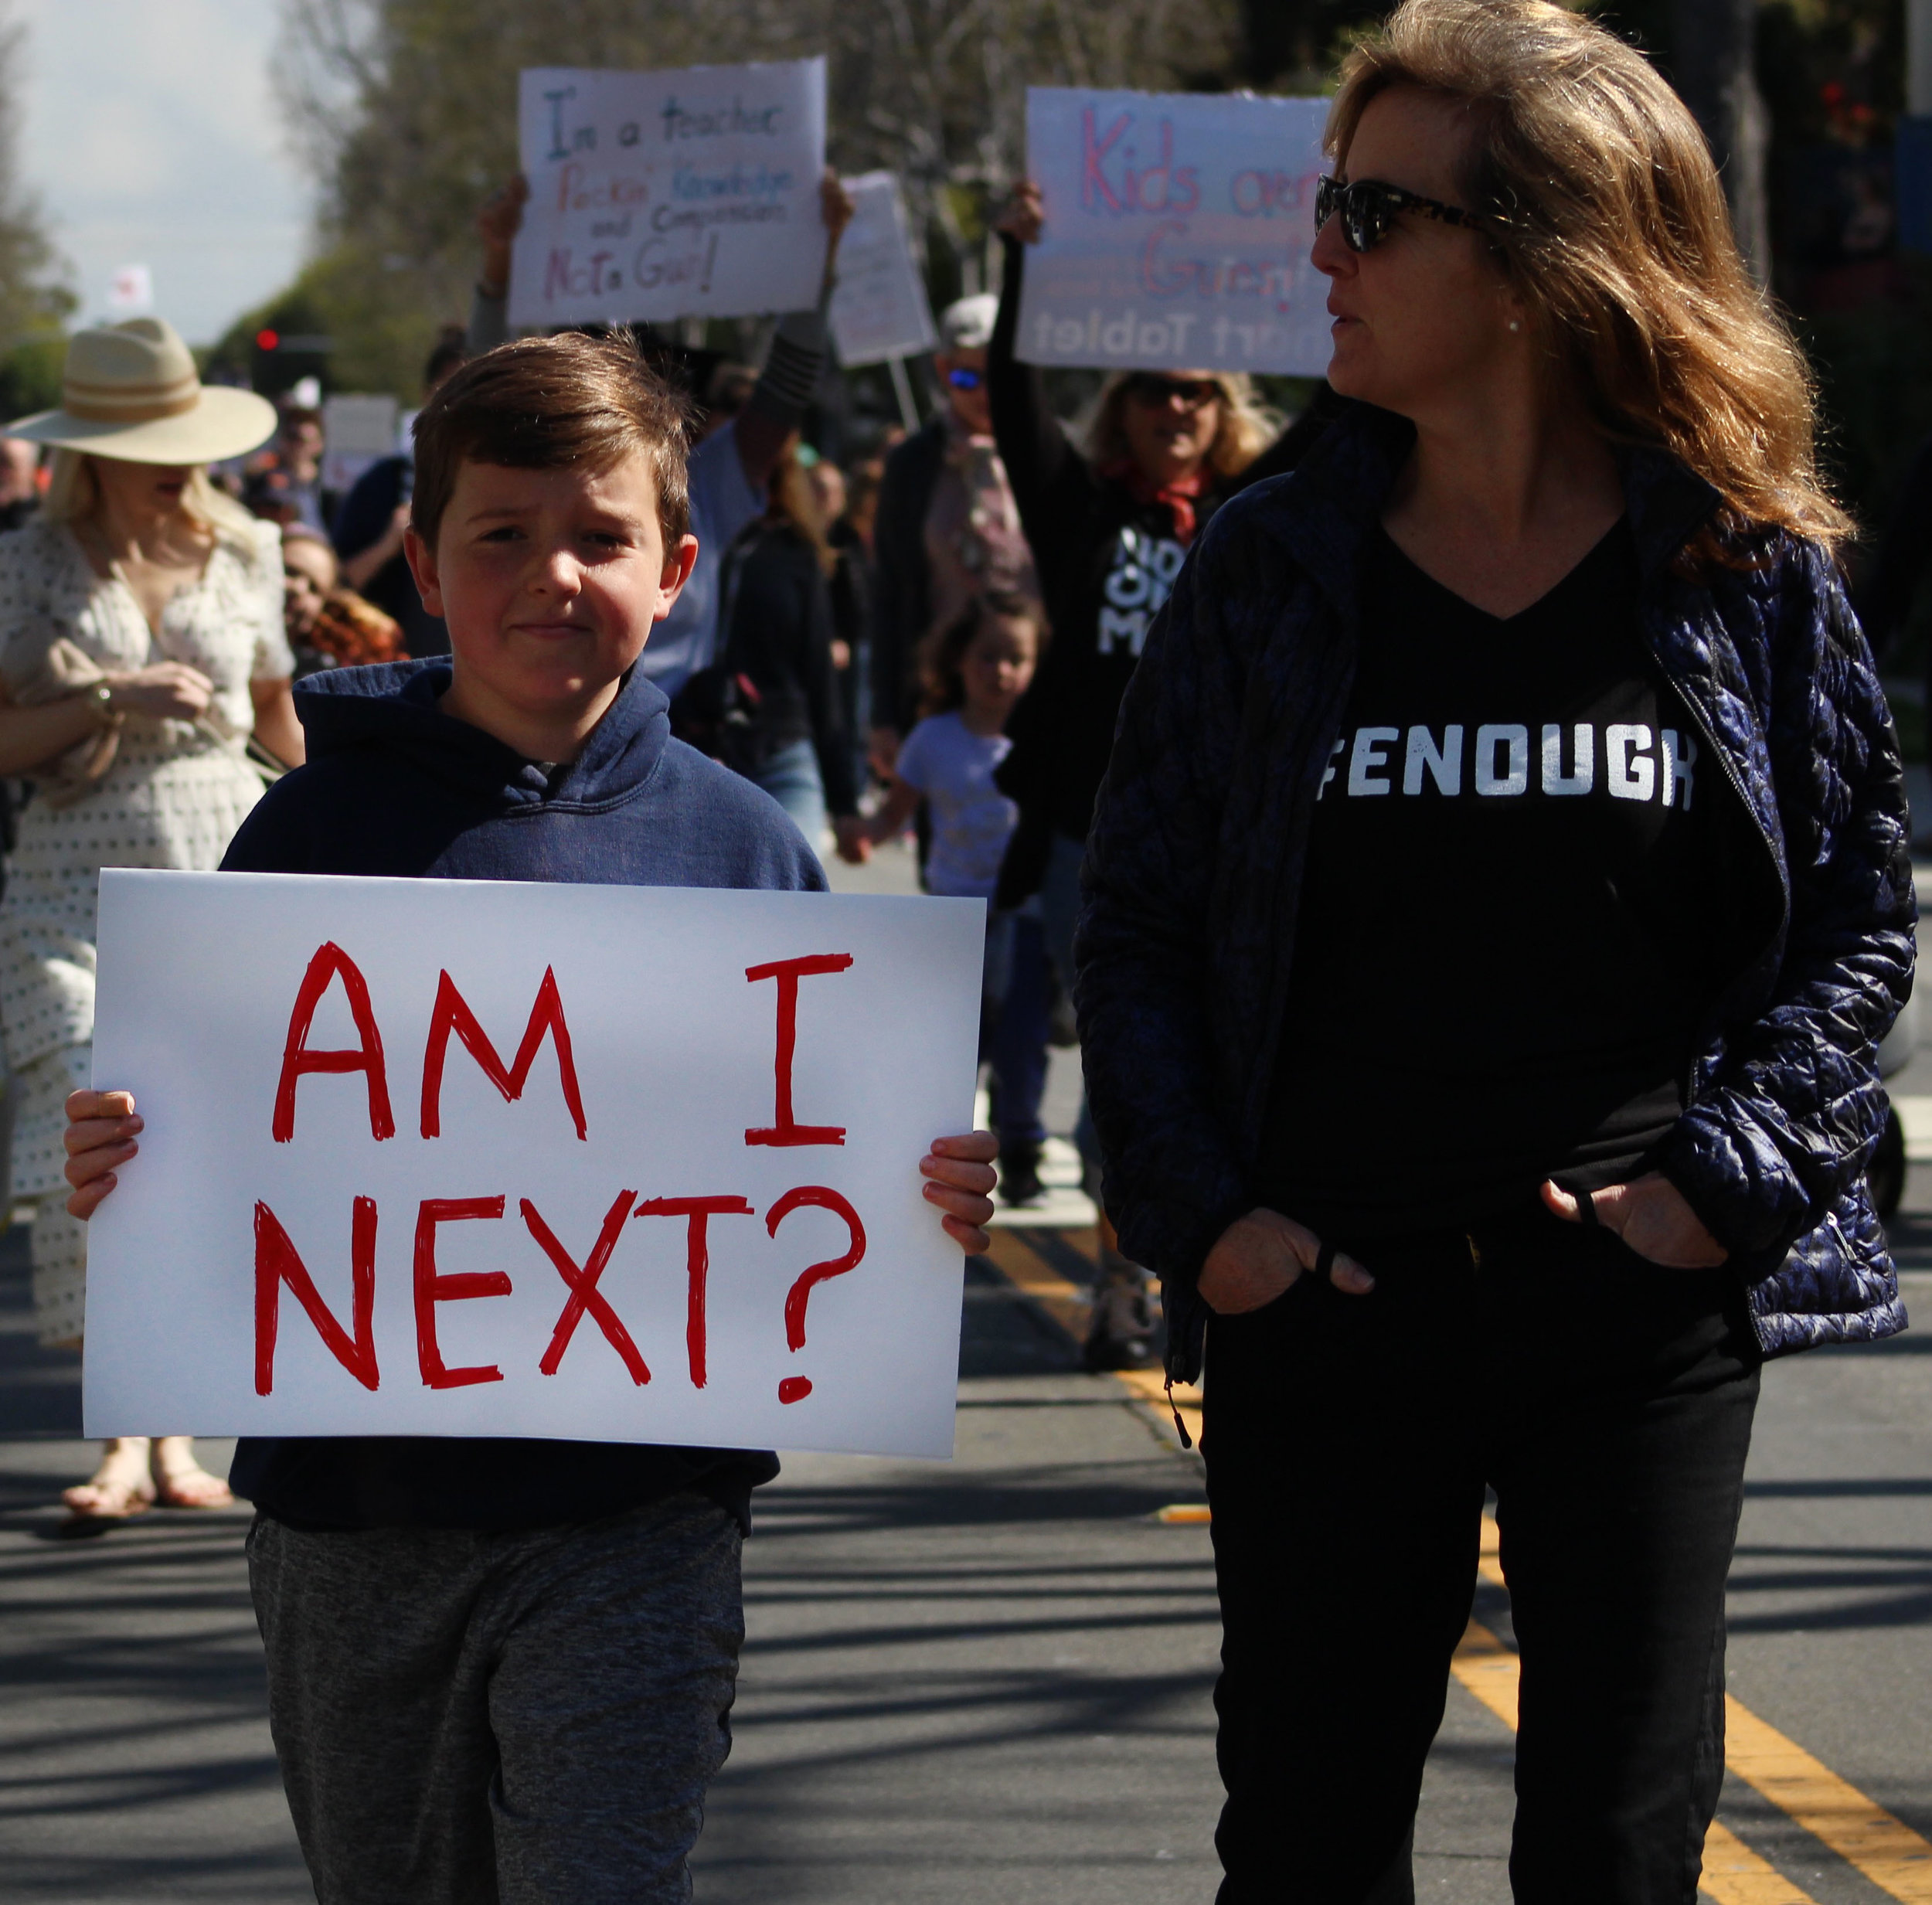  Jack Schneider and his mom, Laura Scheider, walk within the crowd holding homemade signs and chanting along with the protest on Montana Avenue in Santa Monica, California.&nbsp;On Saturday, March 24, 2018. (Pyper Witt/Corsair Photo) 